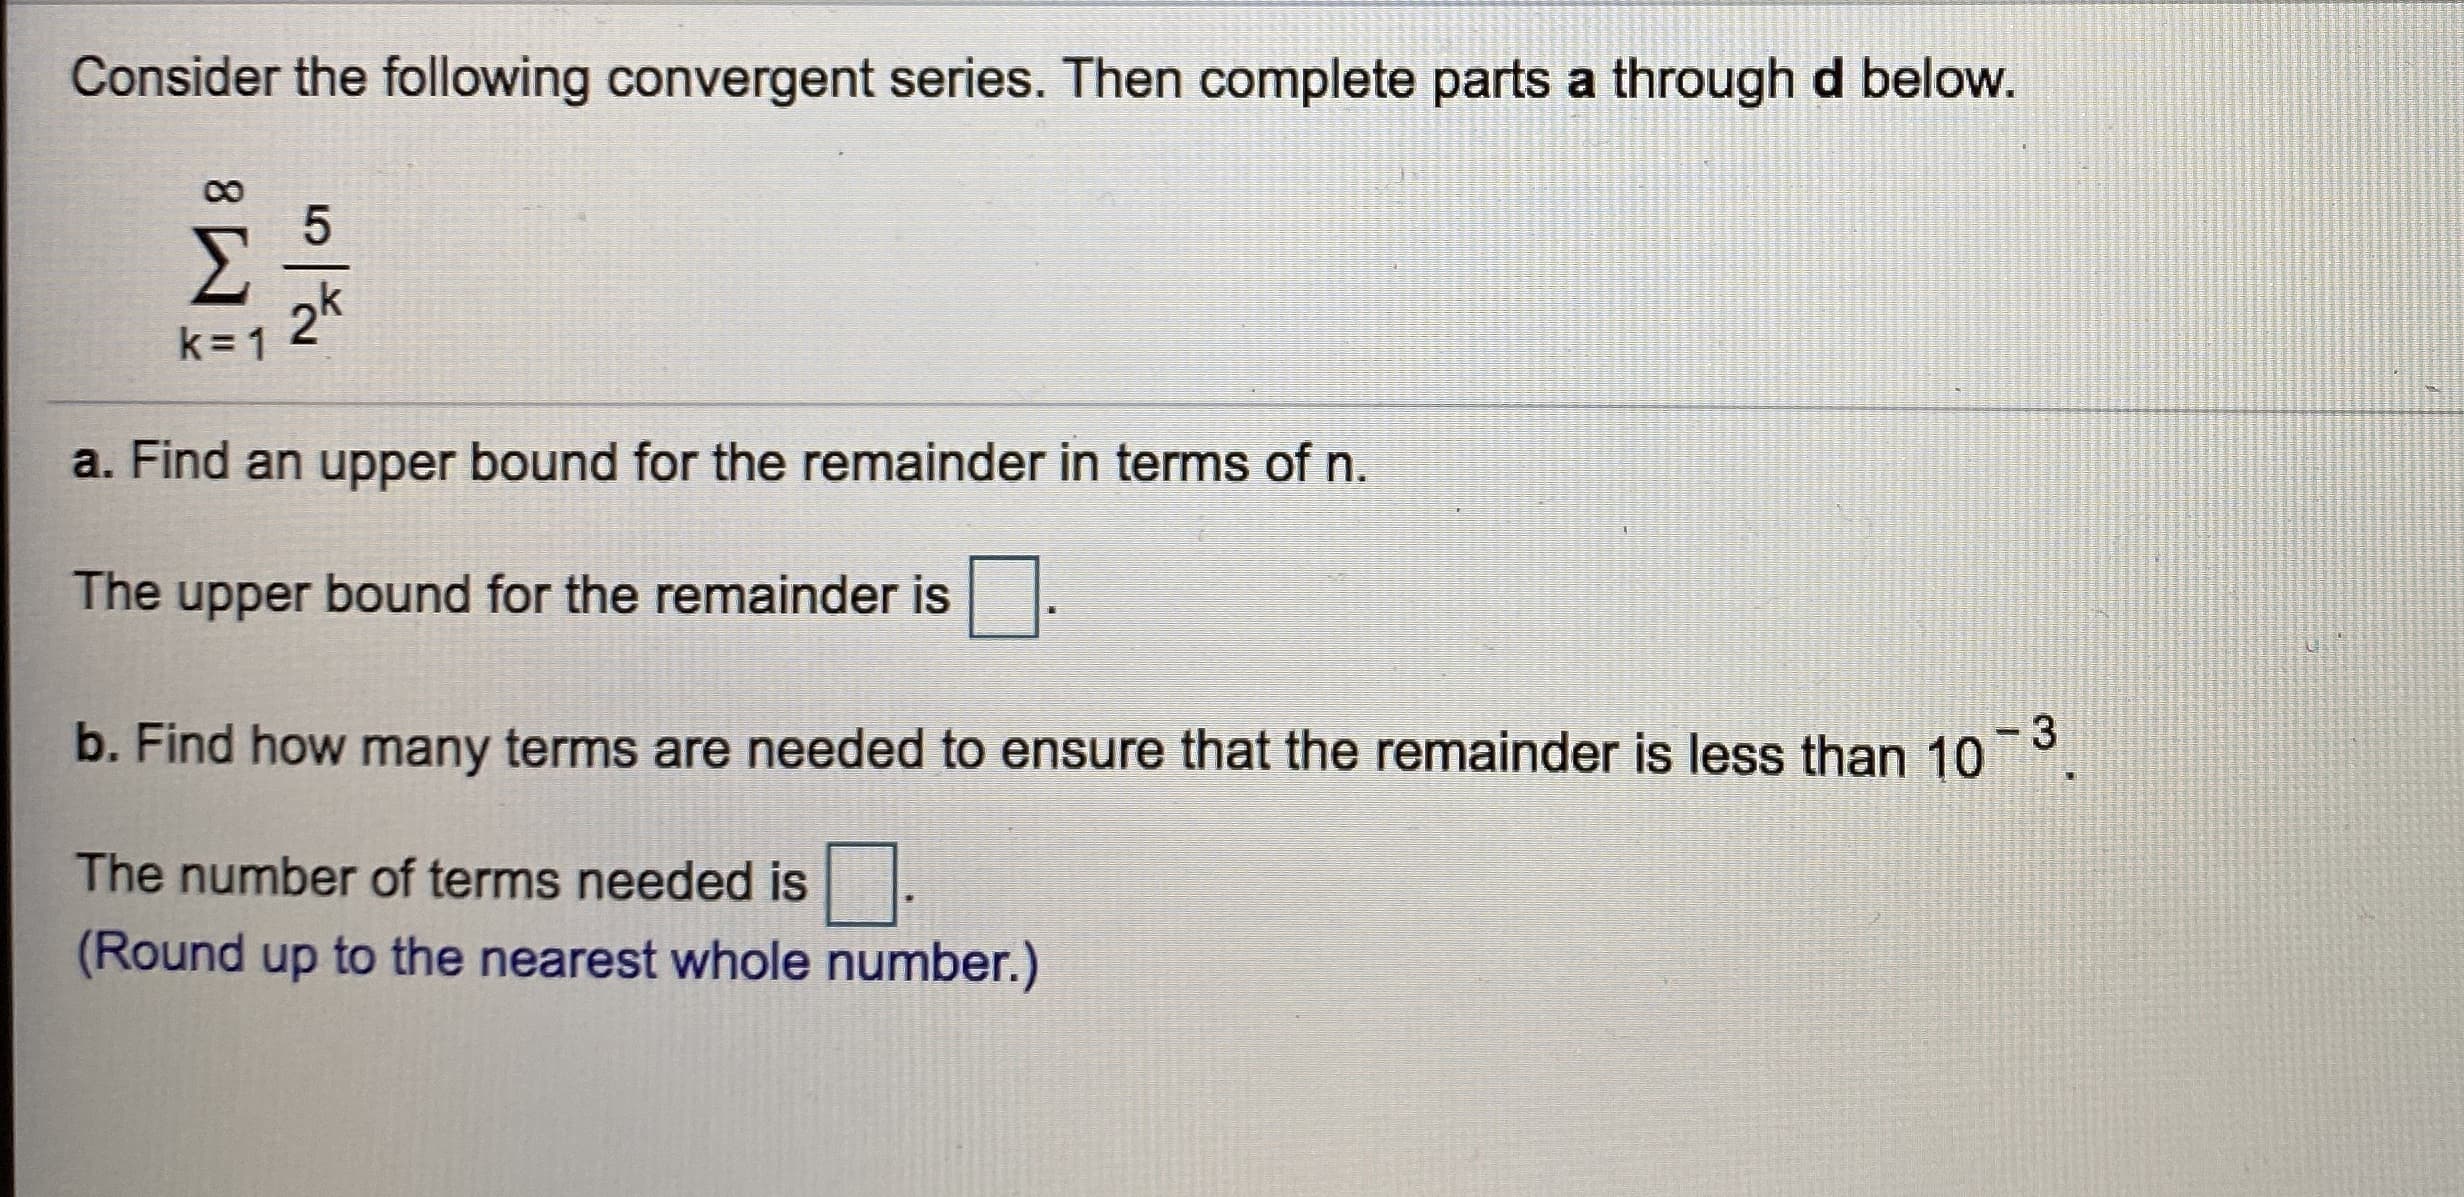 Consider the following convergent series. Then complete parts a through d below.
Σ
2k
k= 1
a. Find an upper bound for the remainder in terms of n.
The upper bound for the remainder is.
b. Find how many terms are needed to ensure that the remainder is less than 10
-3
The number of terms needed is|
(Round up to the nearest whole number.)
